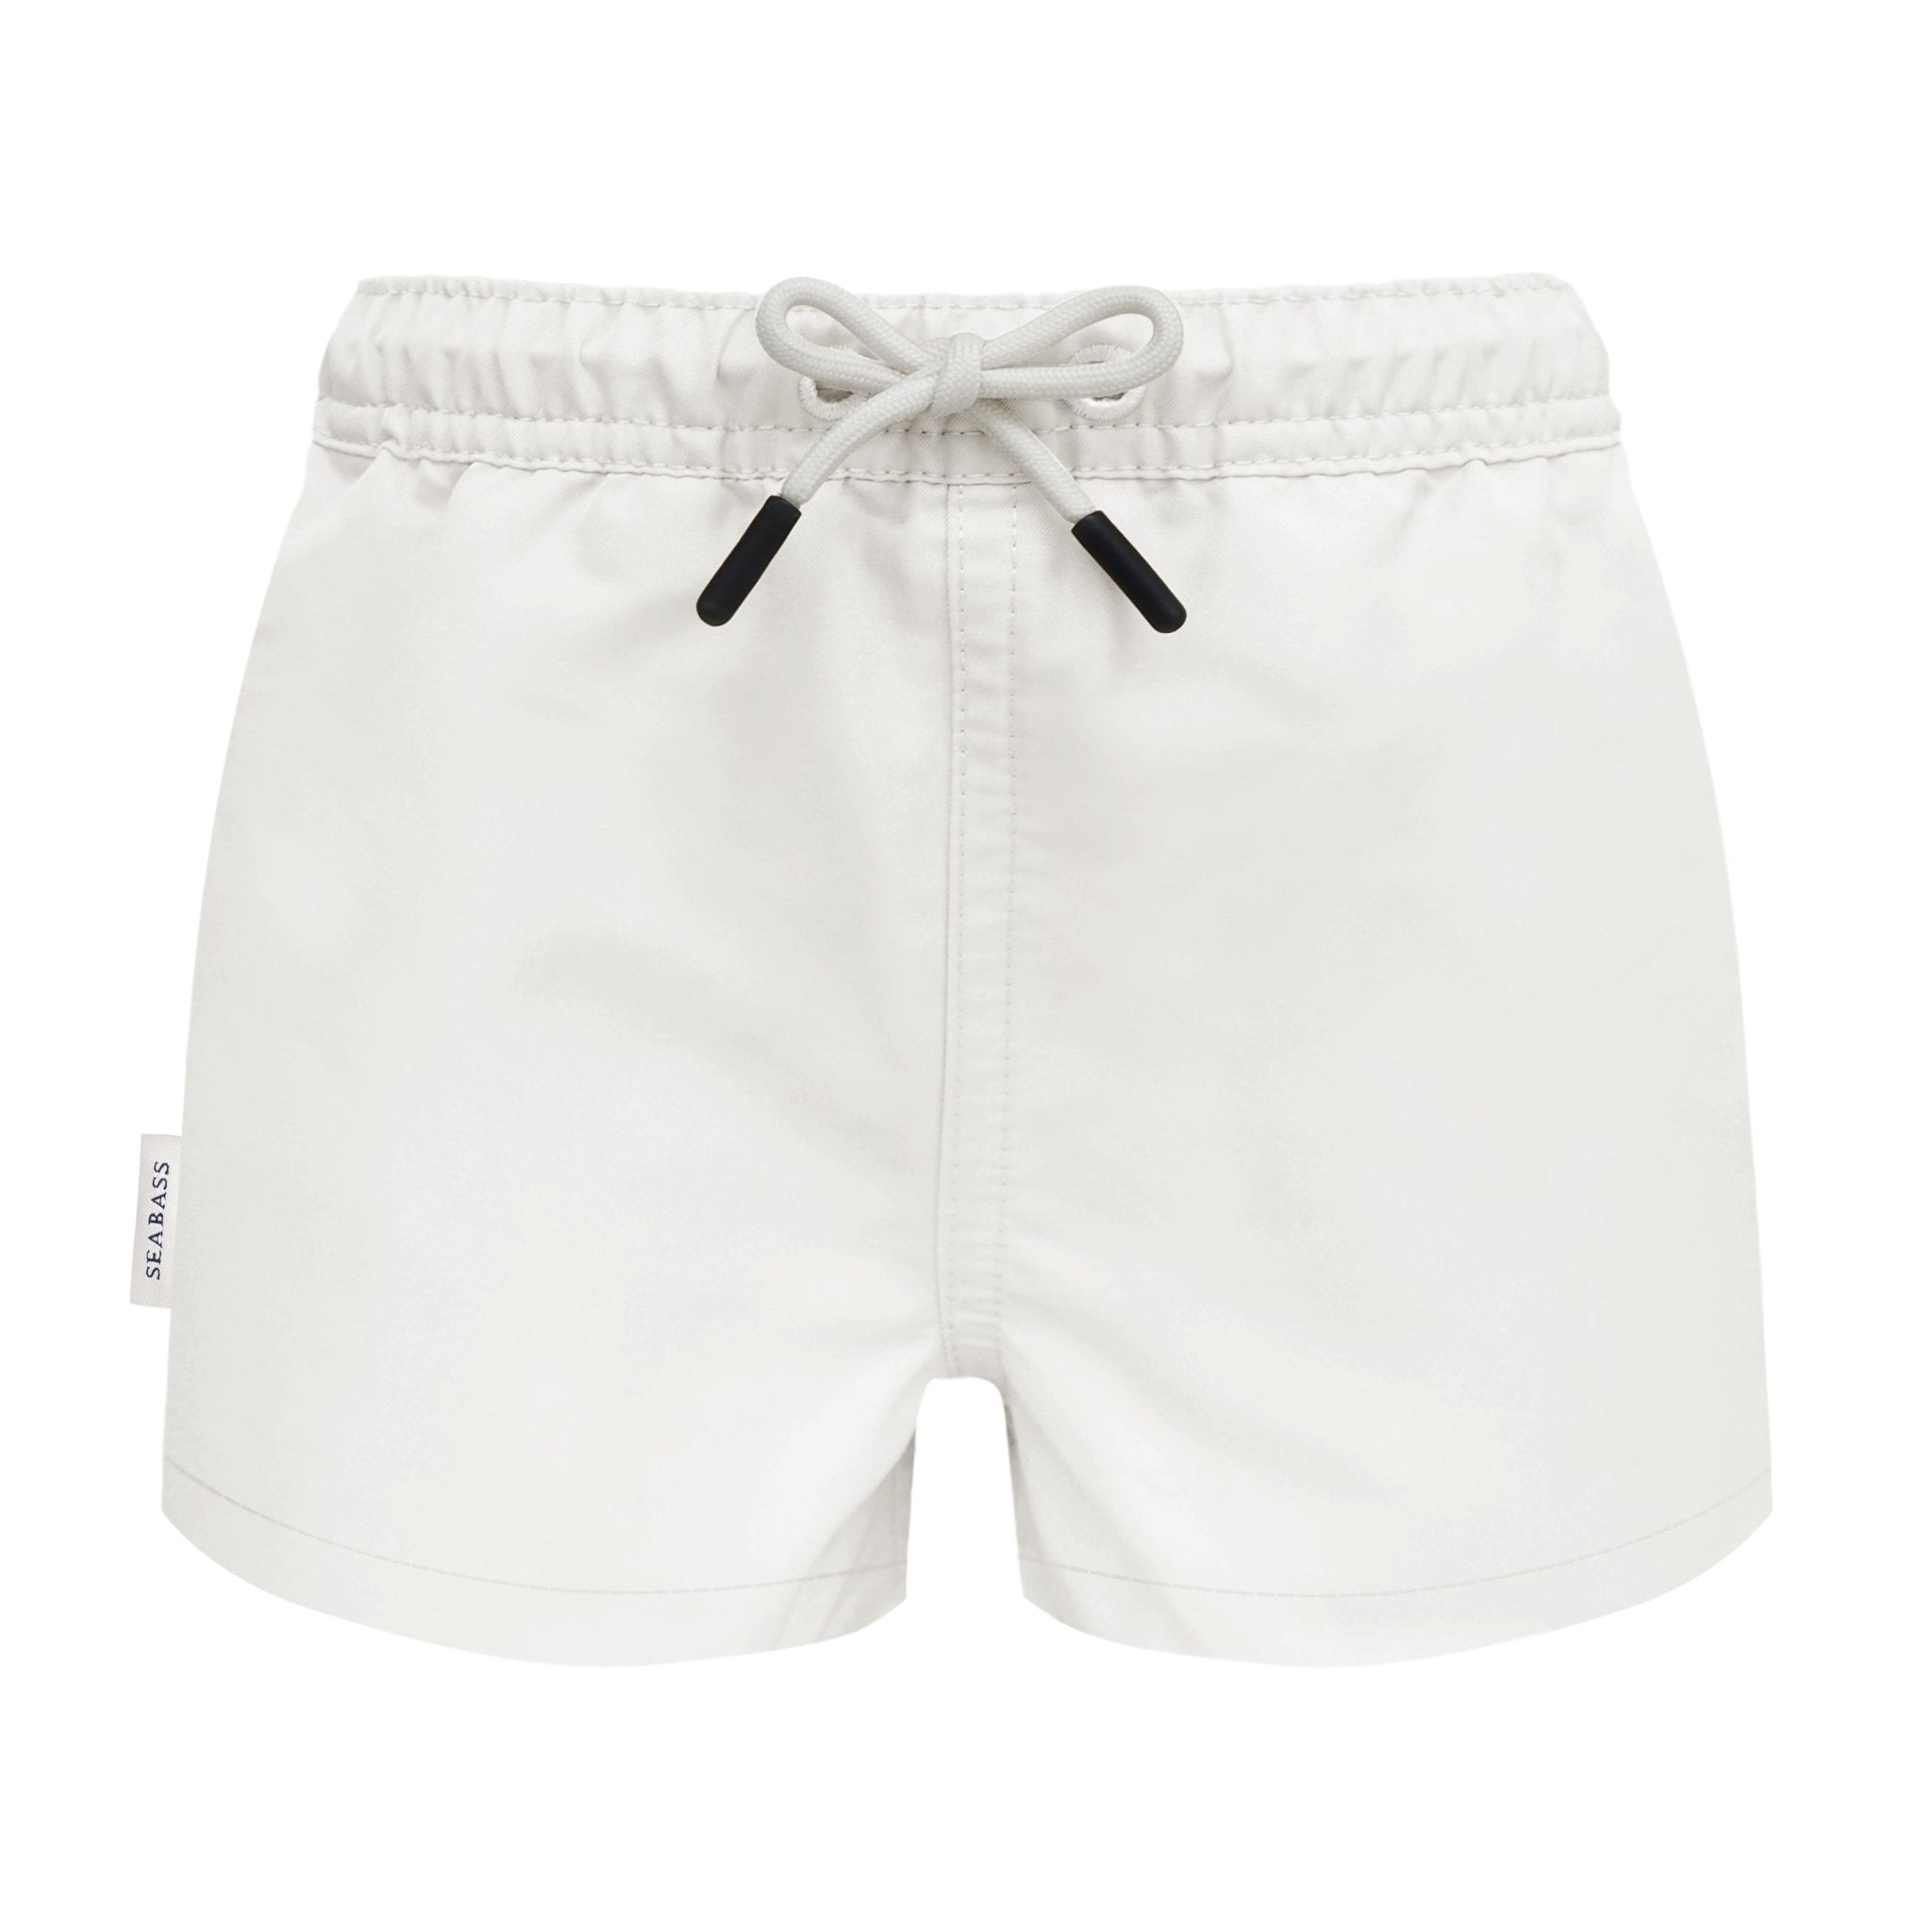 UV Swim Set - Short White and Polo Clearwater Blue (UPF 50+) - SEABASS official